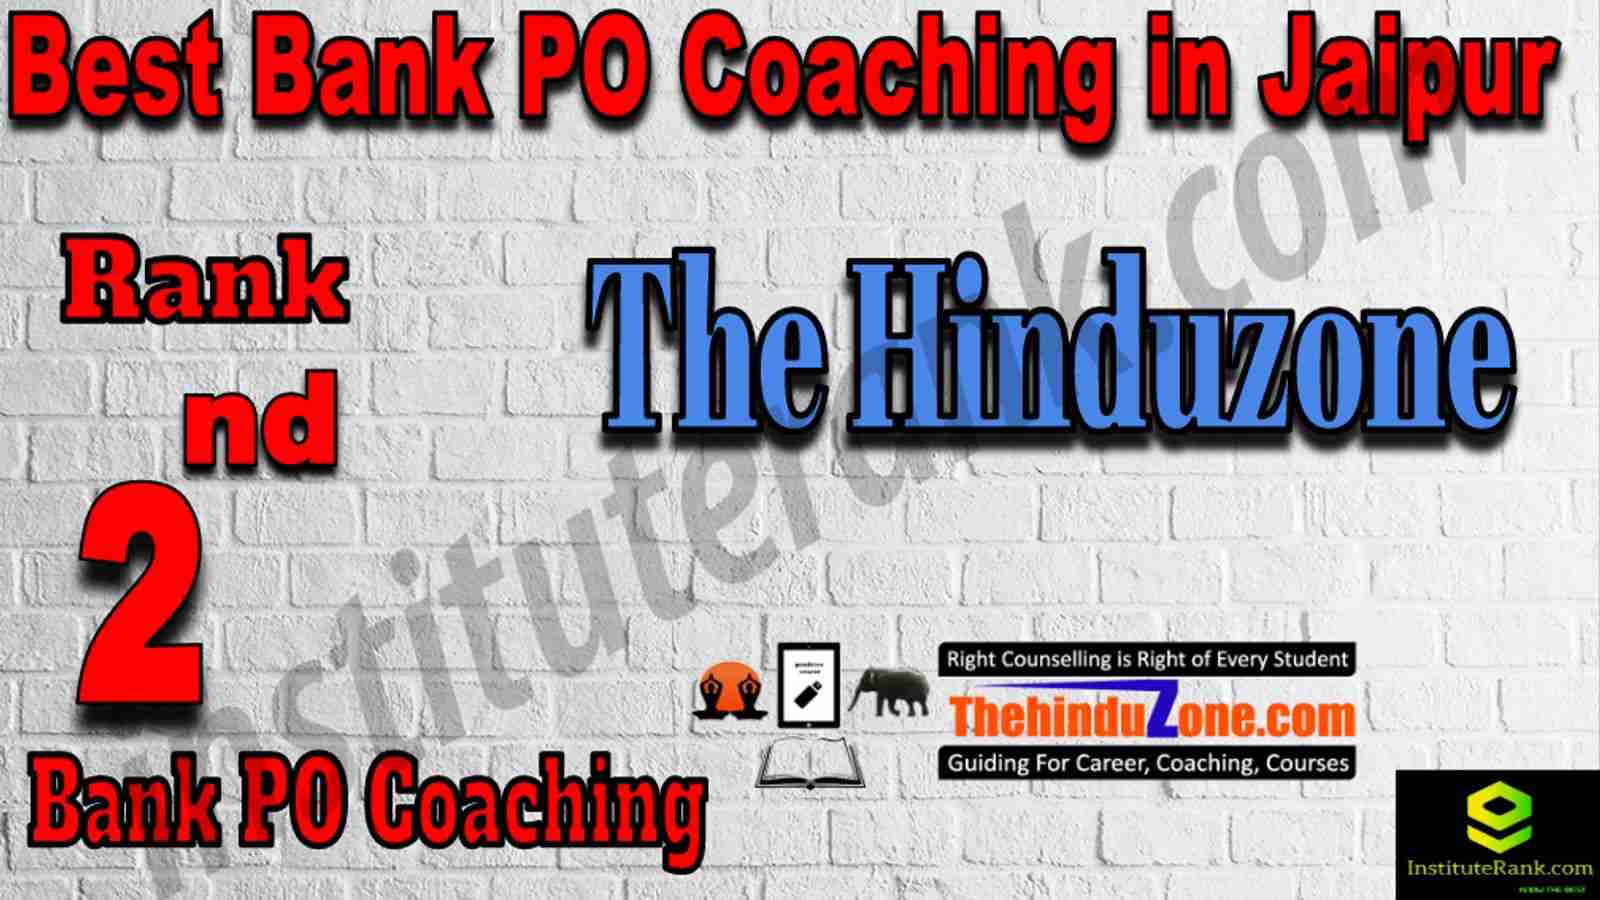 2nd Best Bank PO Coaching in Jaipur